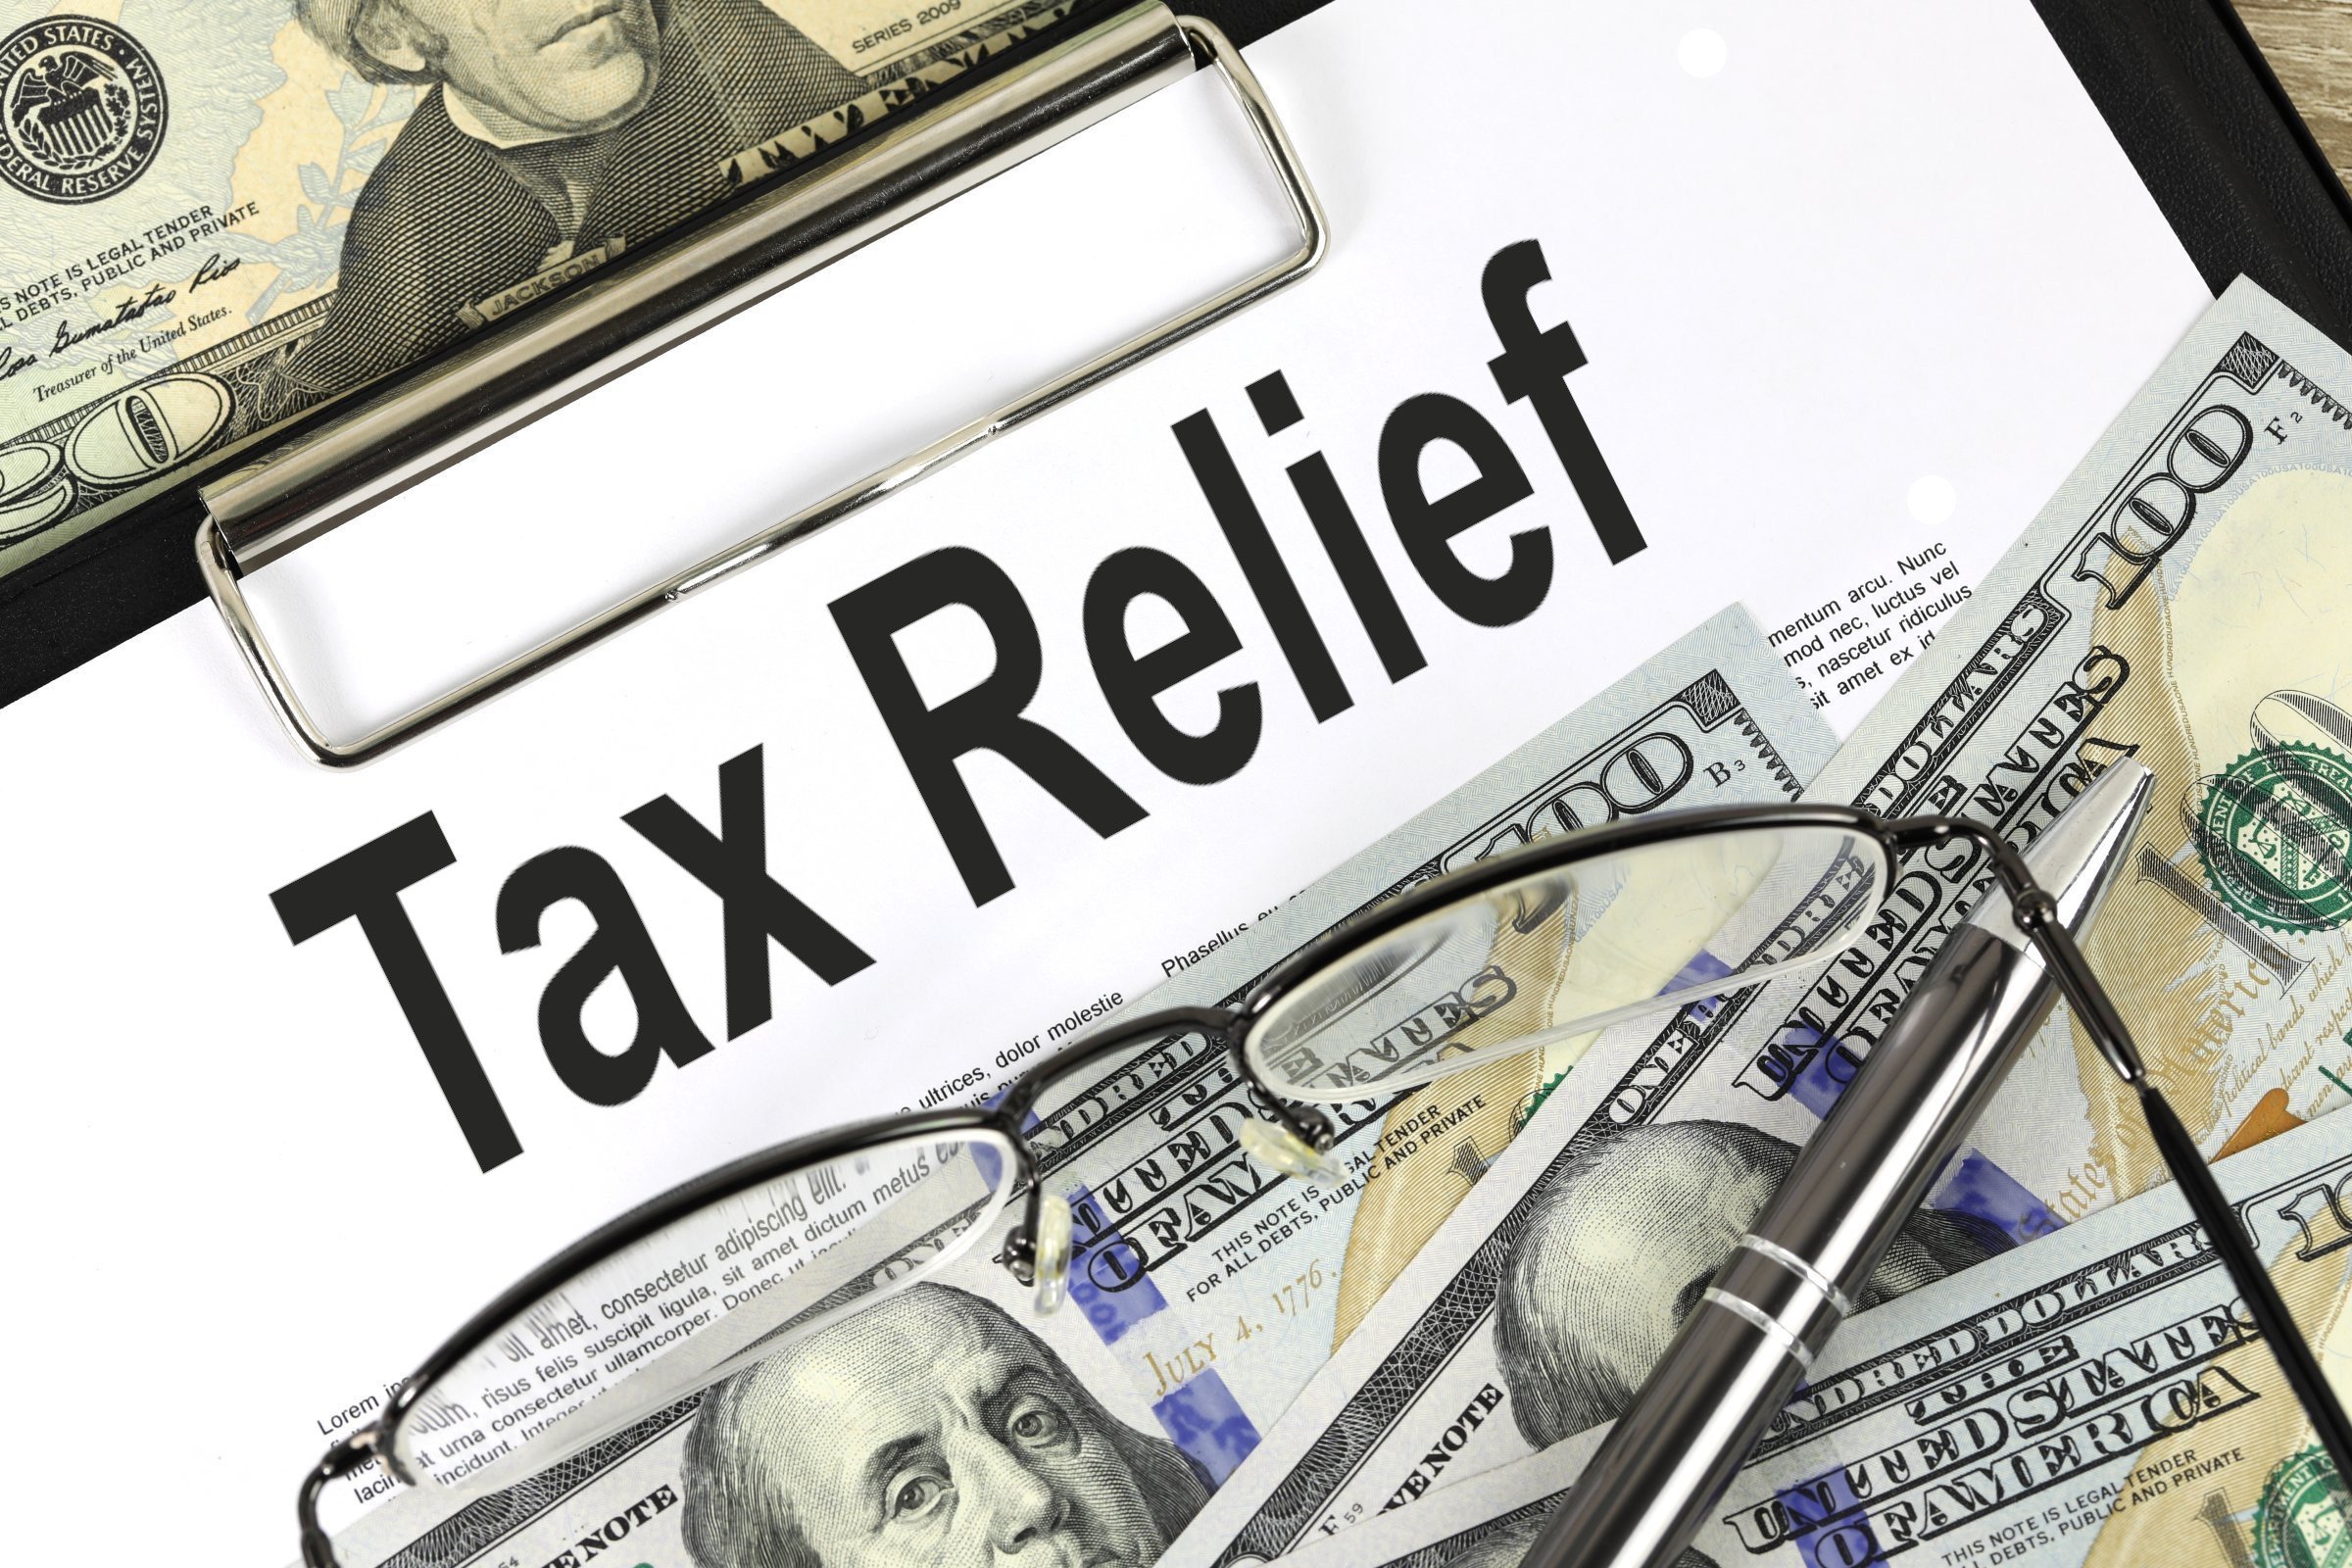 free-of-charge-creative-commons-tax-relief-image-financial-3